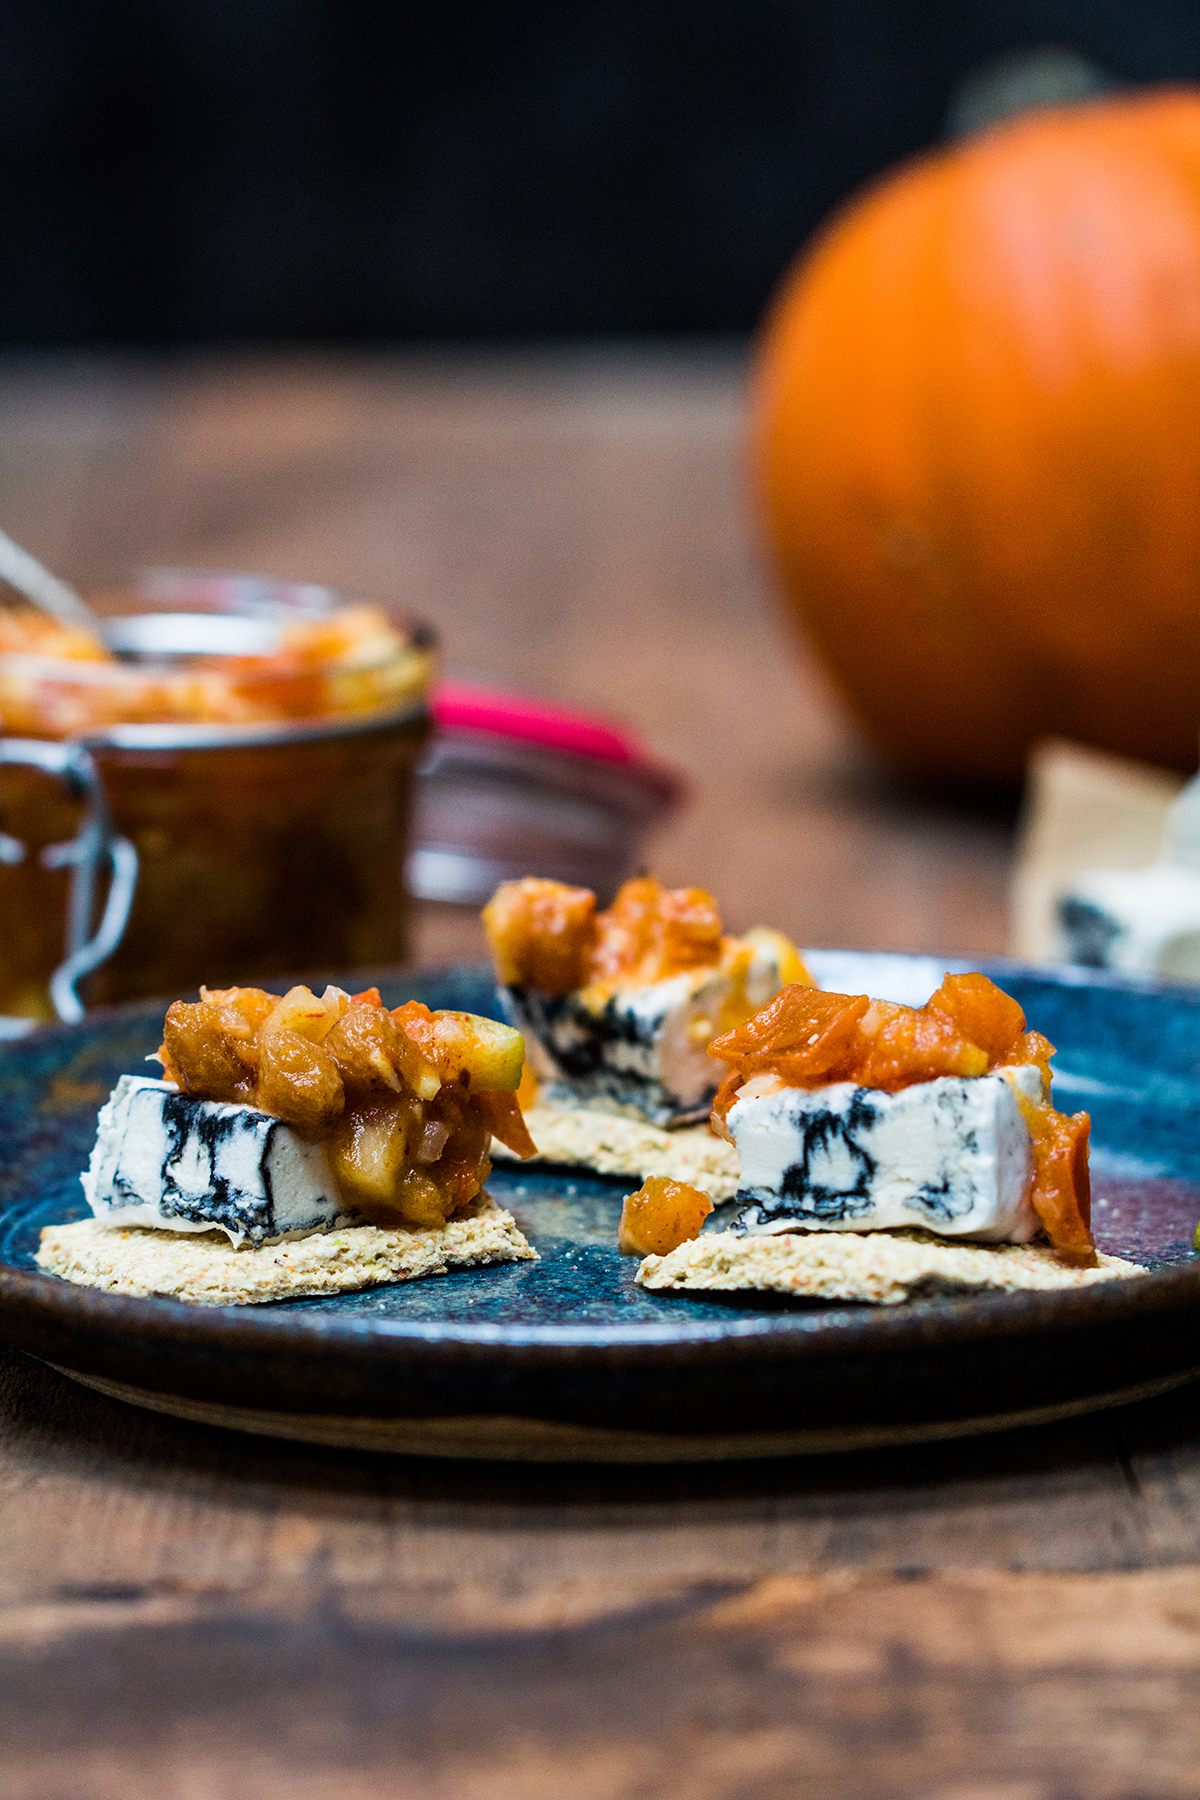 The Persimmon chutney is served as a topping for a tree nut cheese with vegan cracker. The dish is served on a blue plate.